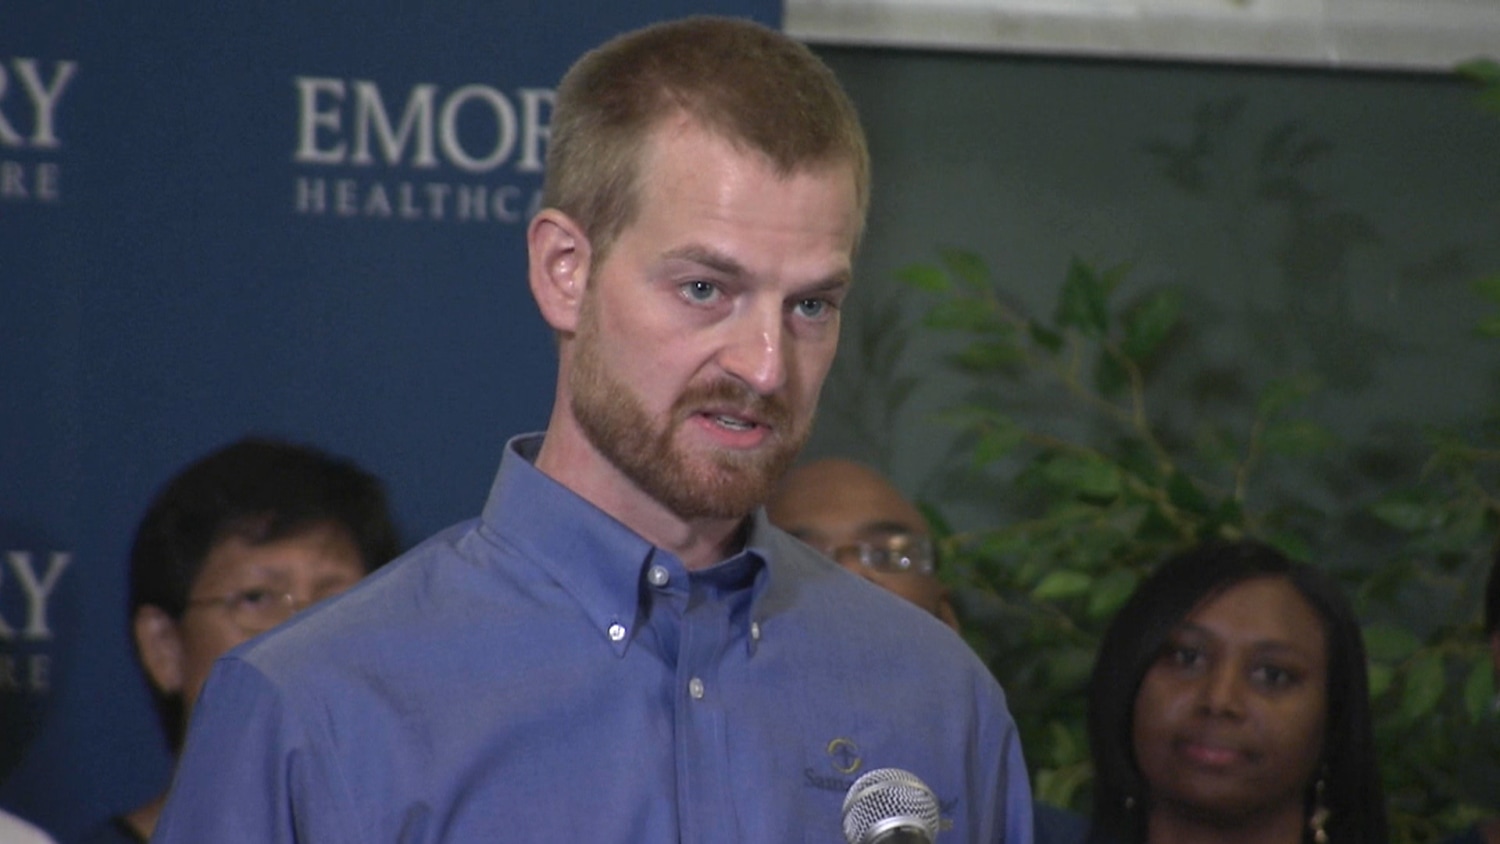 American doctor cured of Ebola finds the virus in eye